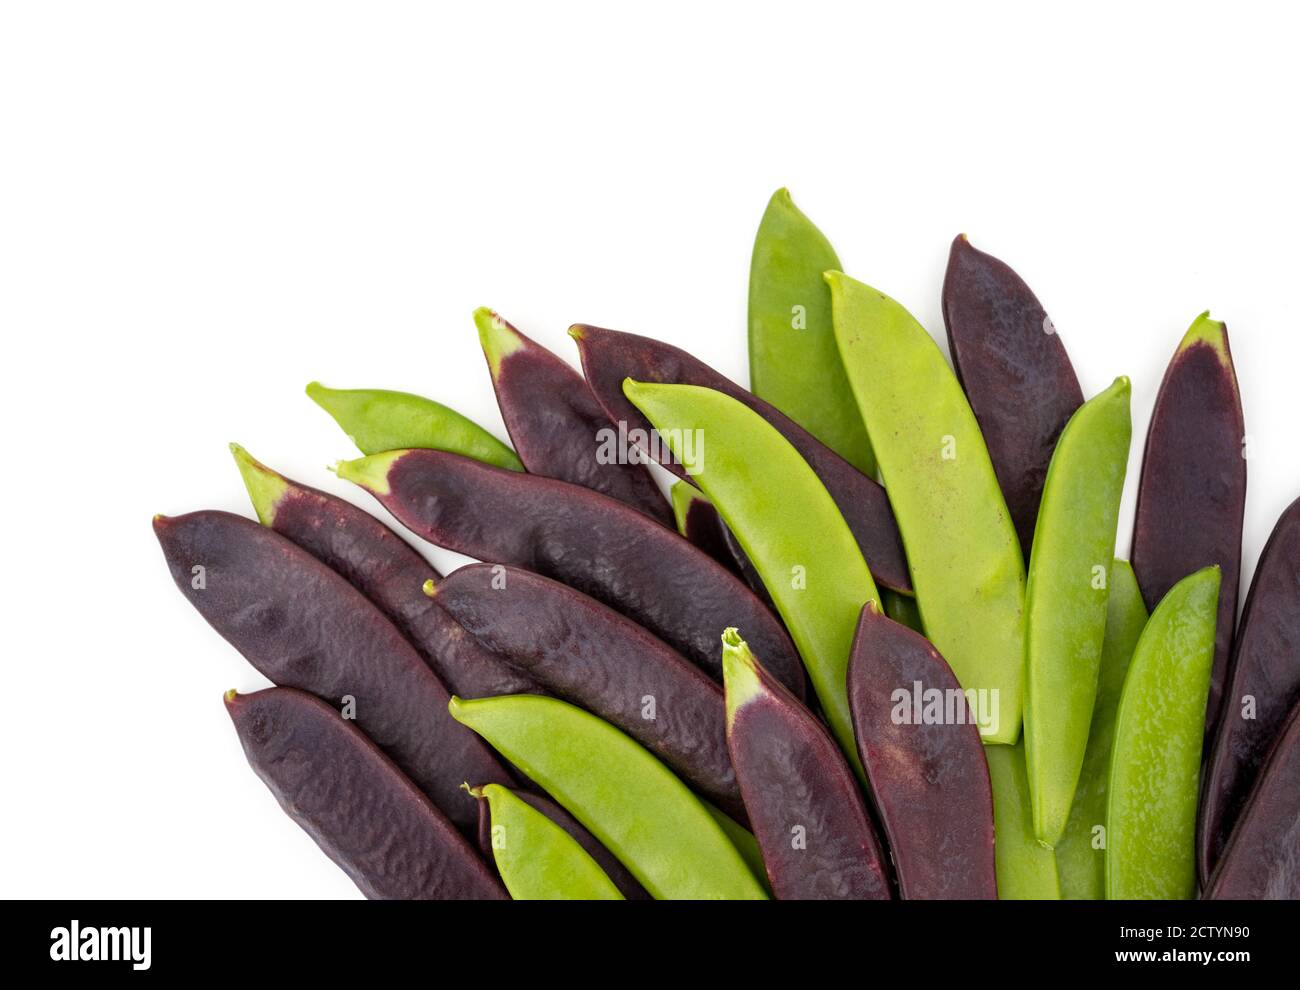 Assortiment of green Sugar Peas and purple Snow Peas. Top view of pea pods aligned at the bottom. Protein rich vegetable. Fresh picked vegetable. Stock Photo